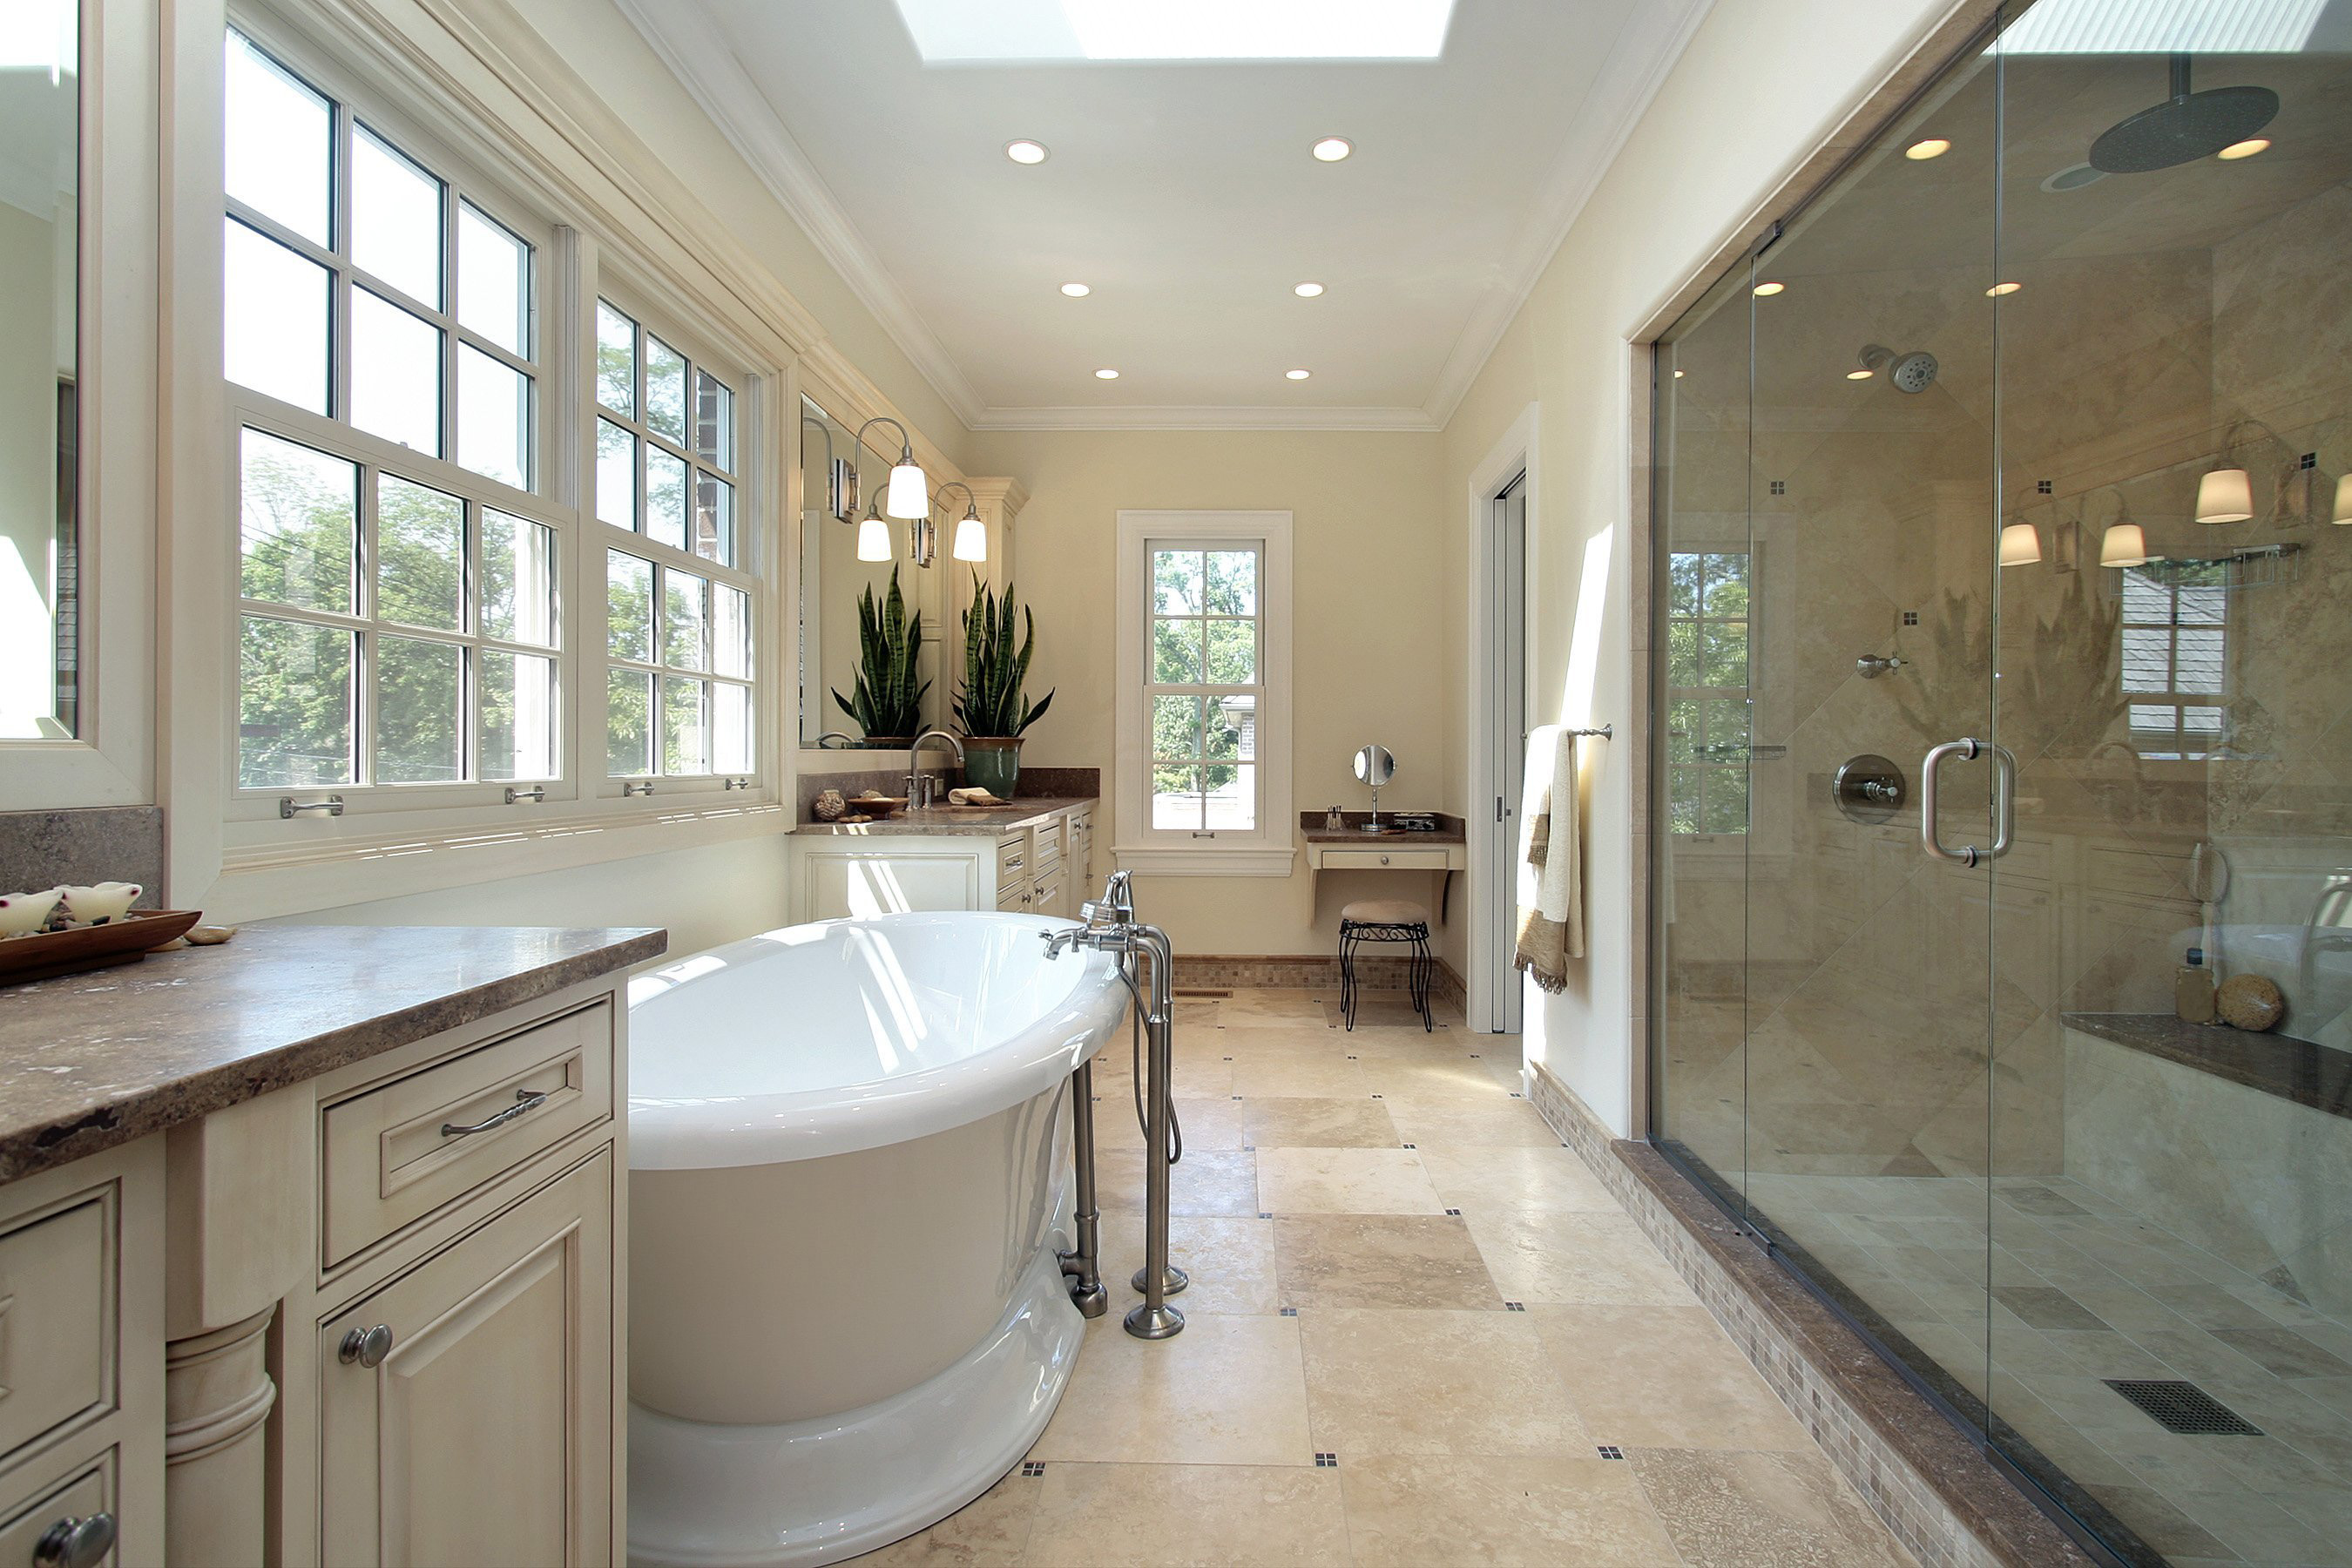 25 Best Bathroom Remodeling Ideas and Inspiration - The ...